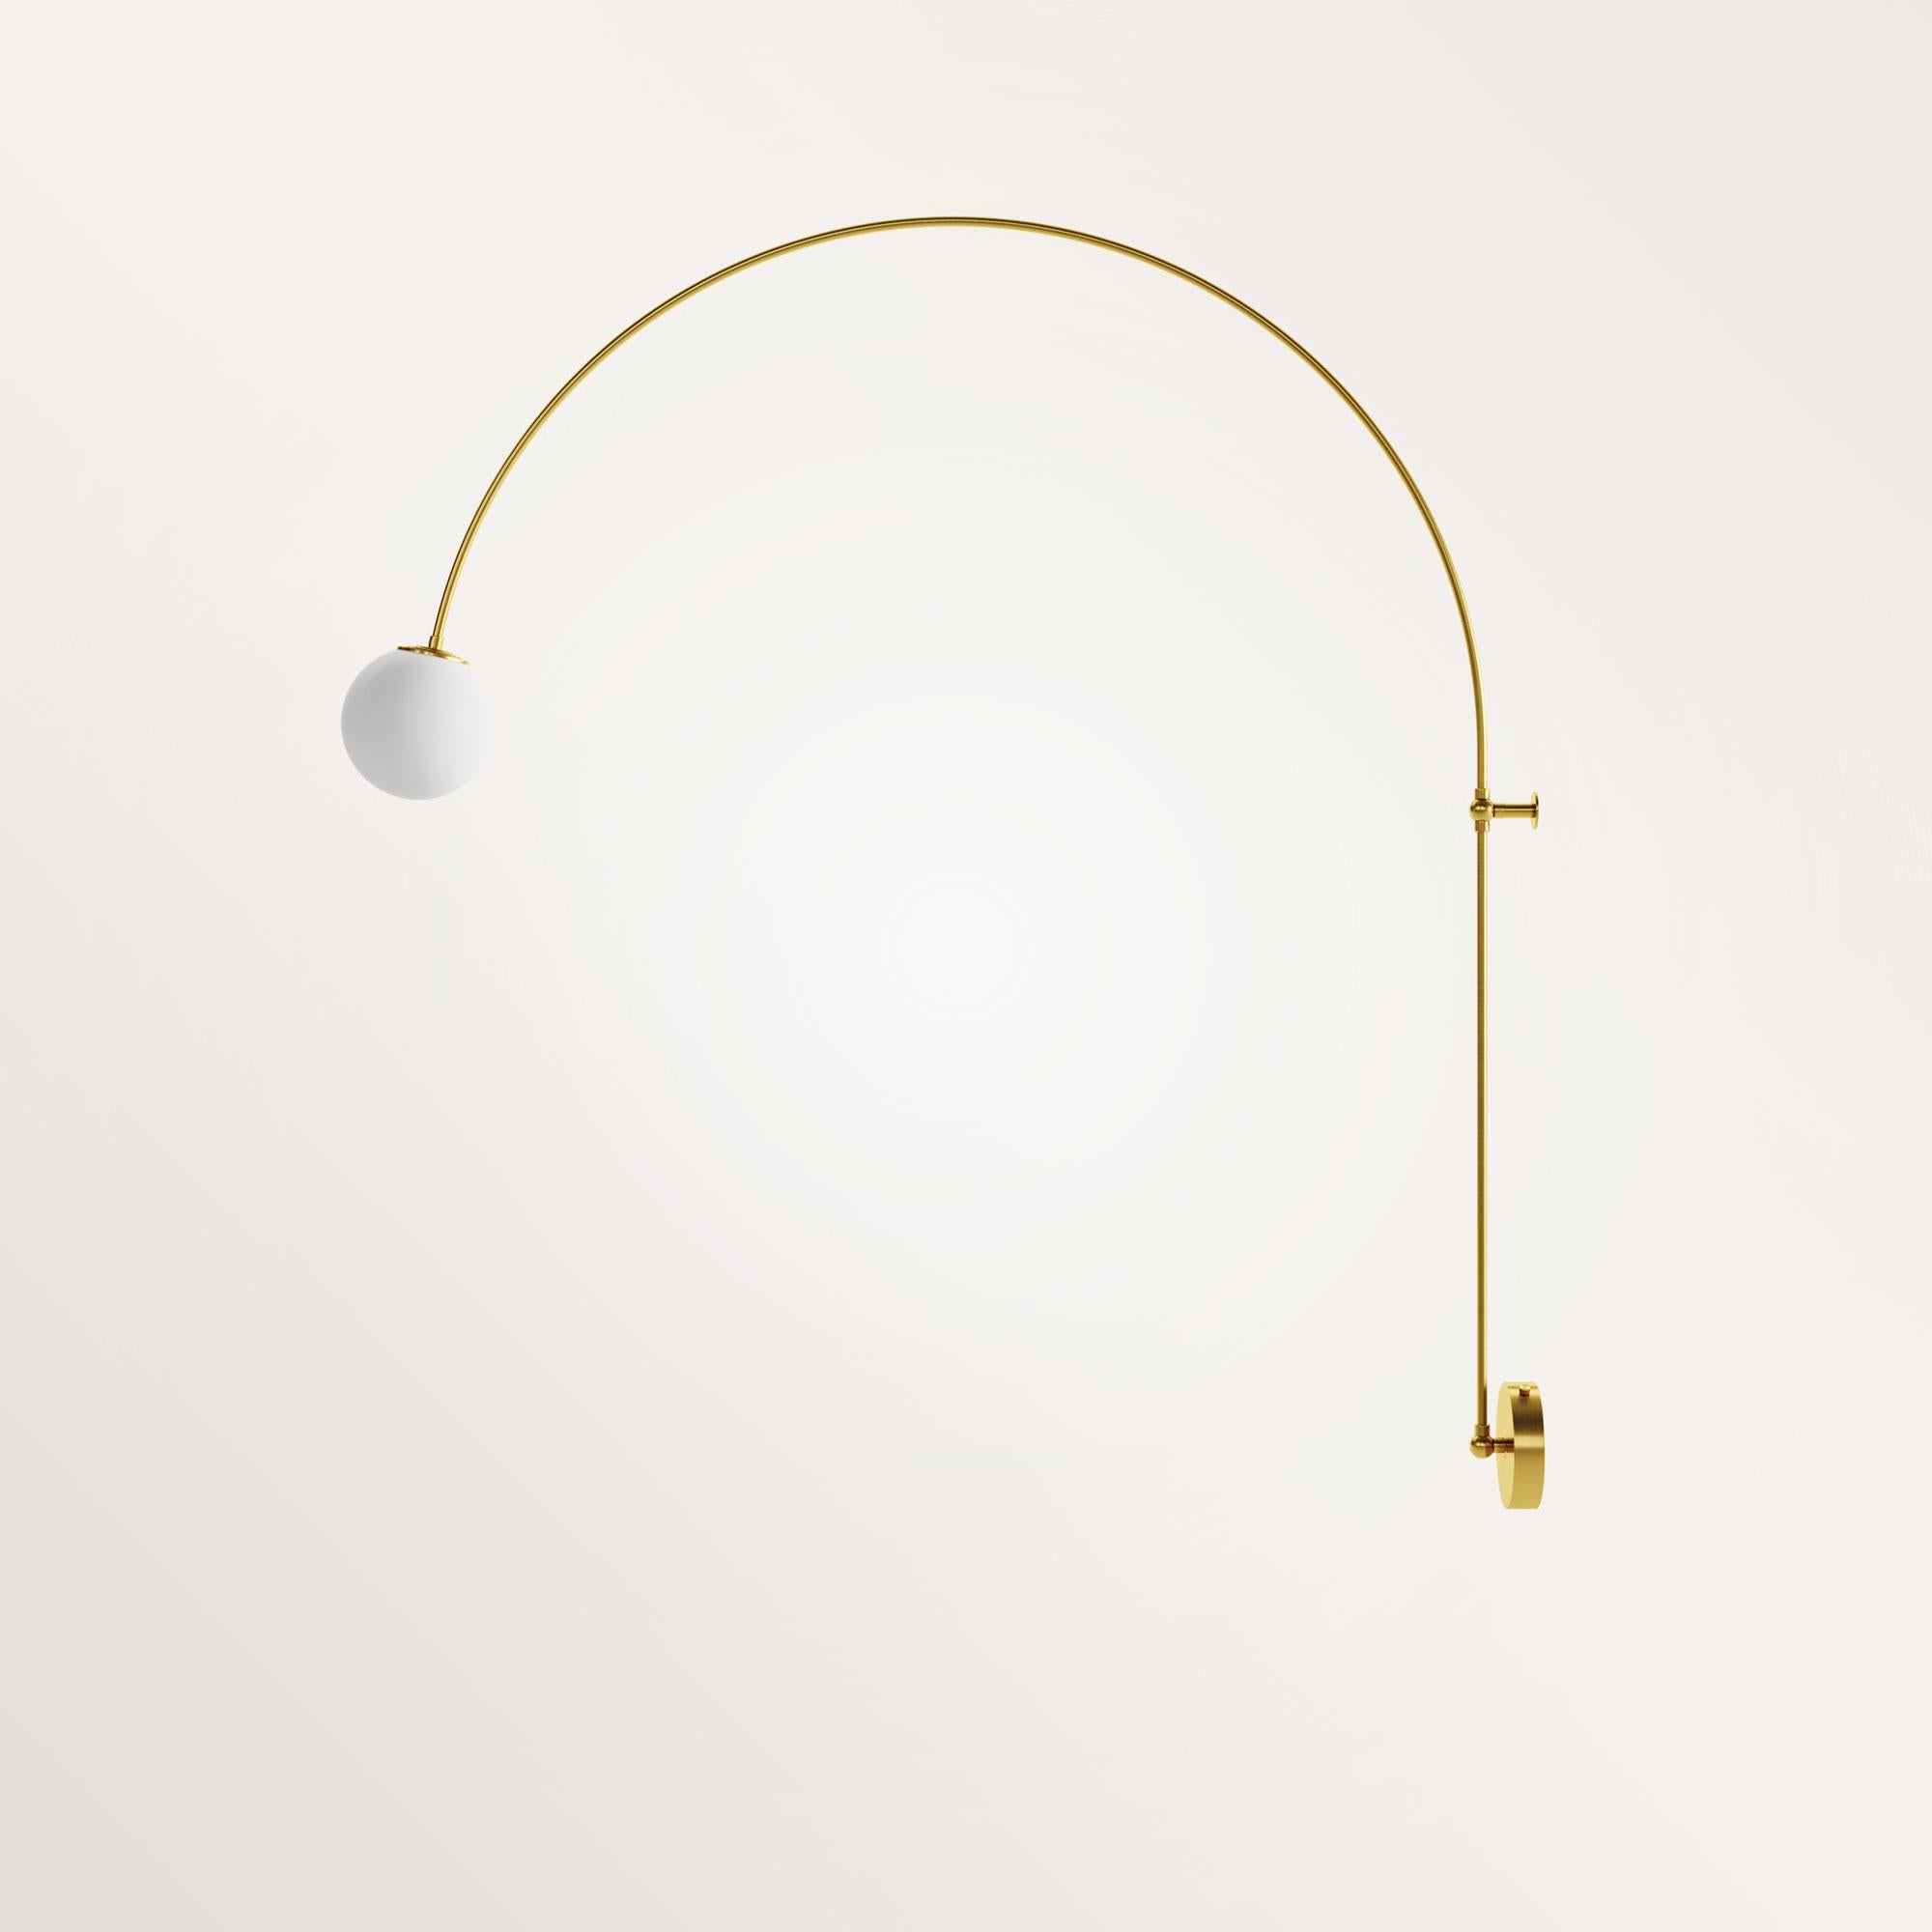 Handmade artemis wall lamp by Gobo Lights
Dimensions: 90 L X 12 l X 100 H
Materials: Brass, Opaline

This lamp takes the shape of the bow used by Artemis, the goddess of the hunt.

Self-taught and from the world of chemistry, this Belgian